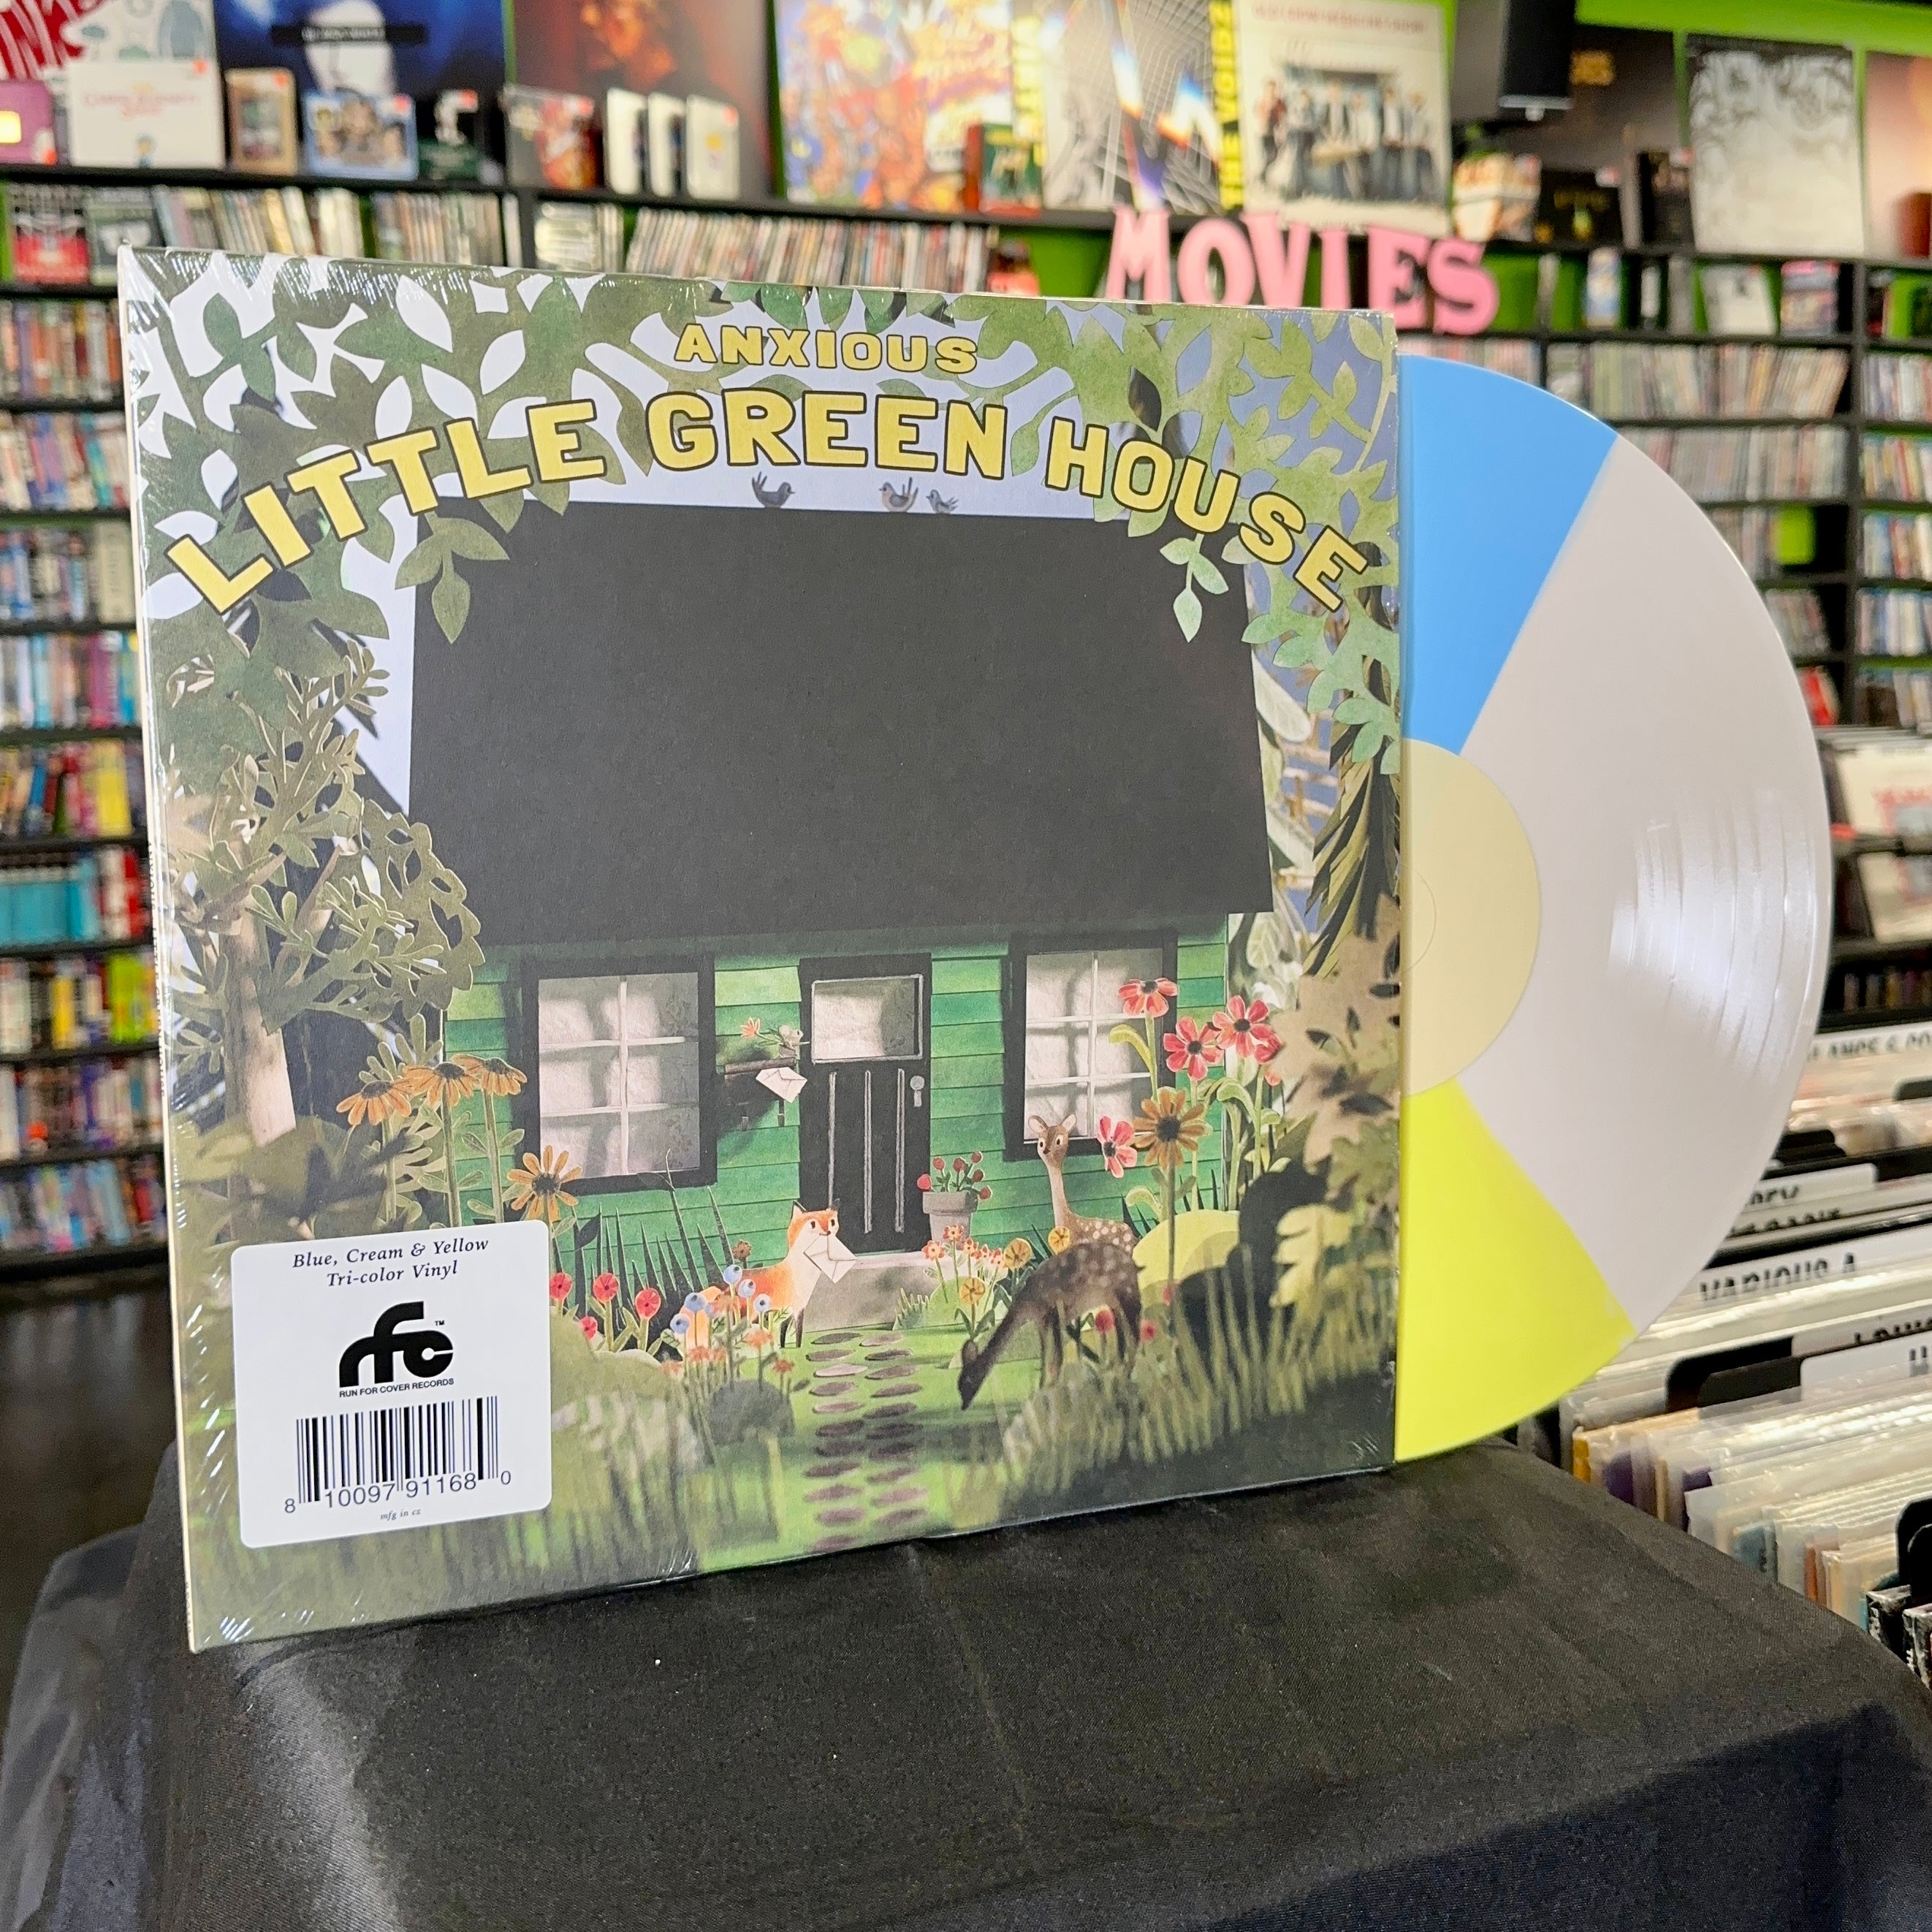 Anxious- Little Green House (Blue, Cream, & Yellow Tri-Color) - Darkside Records